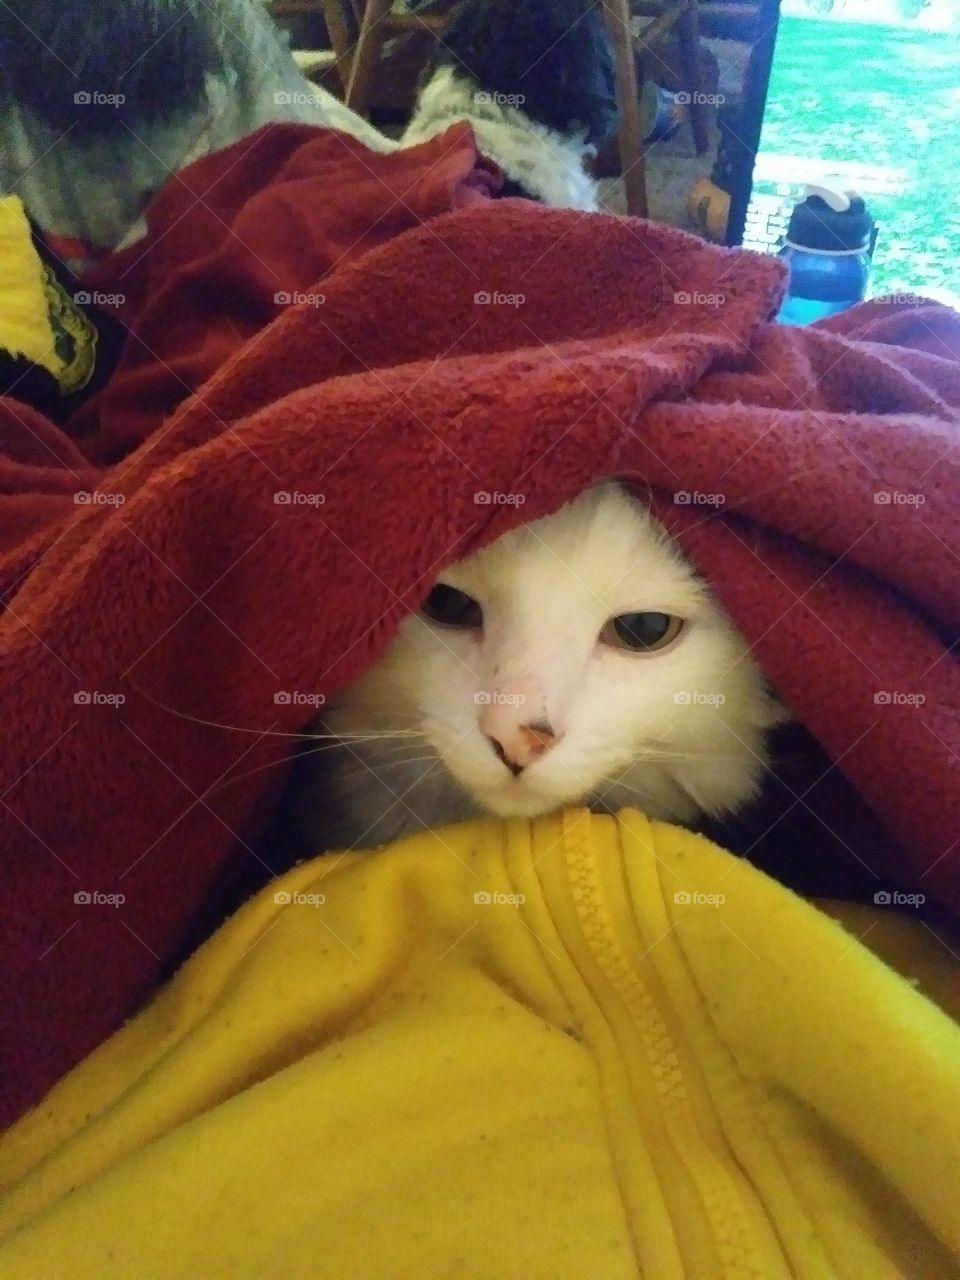 A white cat named Cloud nestled into a blanket